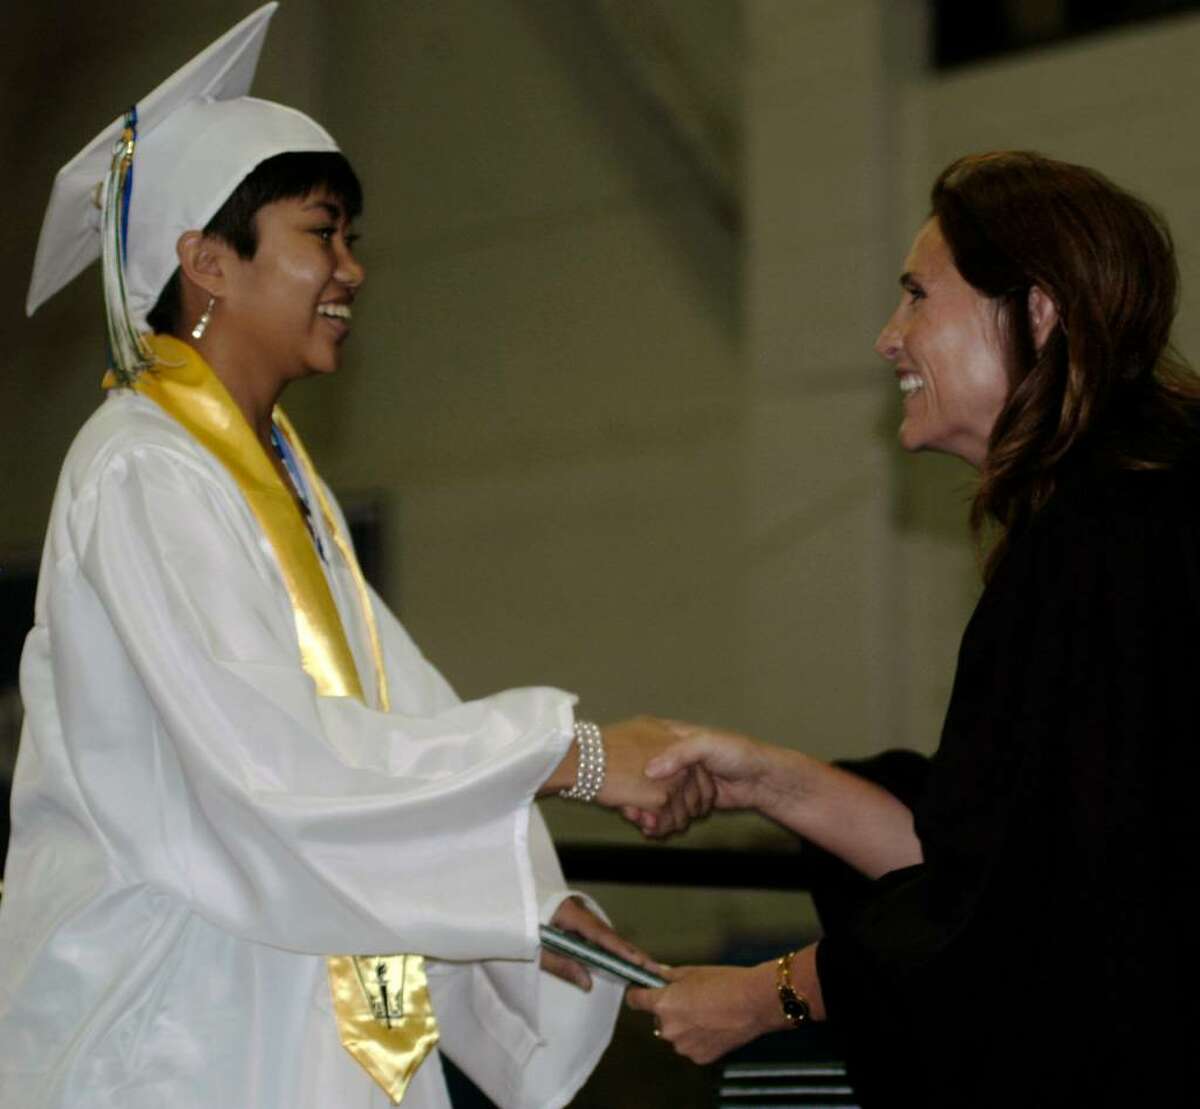 Elizabeth Marandola is a happy graduate as she accepts her diploma Saturday from Board of Education chairman Wendy Faulenbach during New Milford High School's commencement exercises at the O'Neill Center in Danbury.